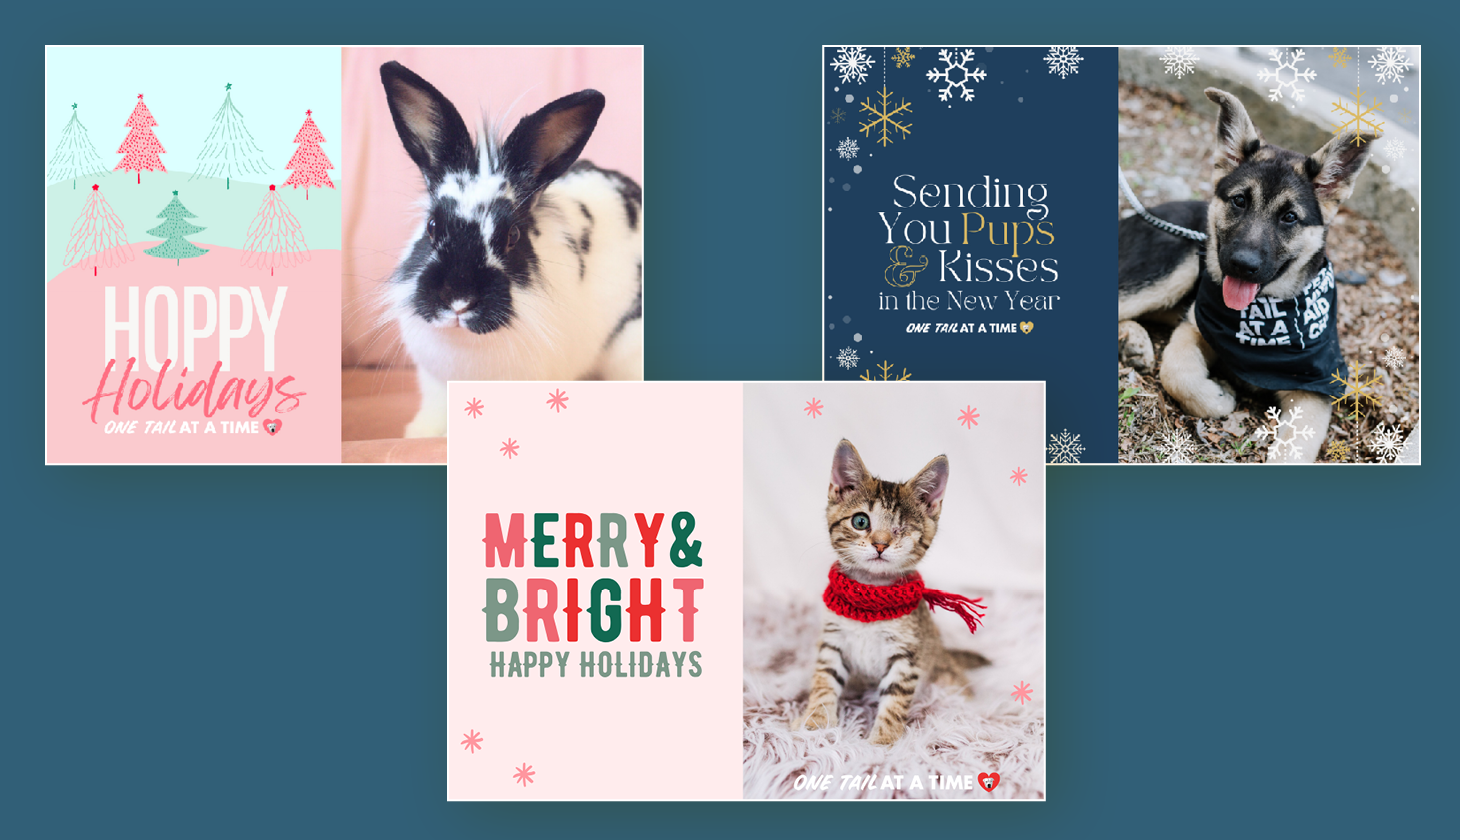 Three animal-themed holiday fundraising eCards designed by One Tail at a Time for a passive fundraising campaign.